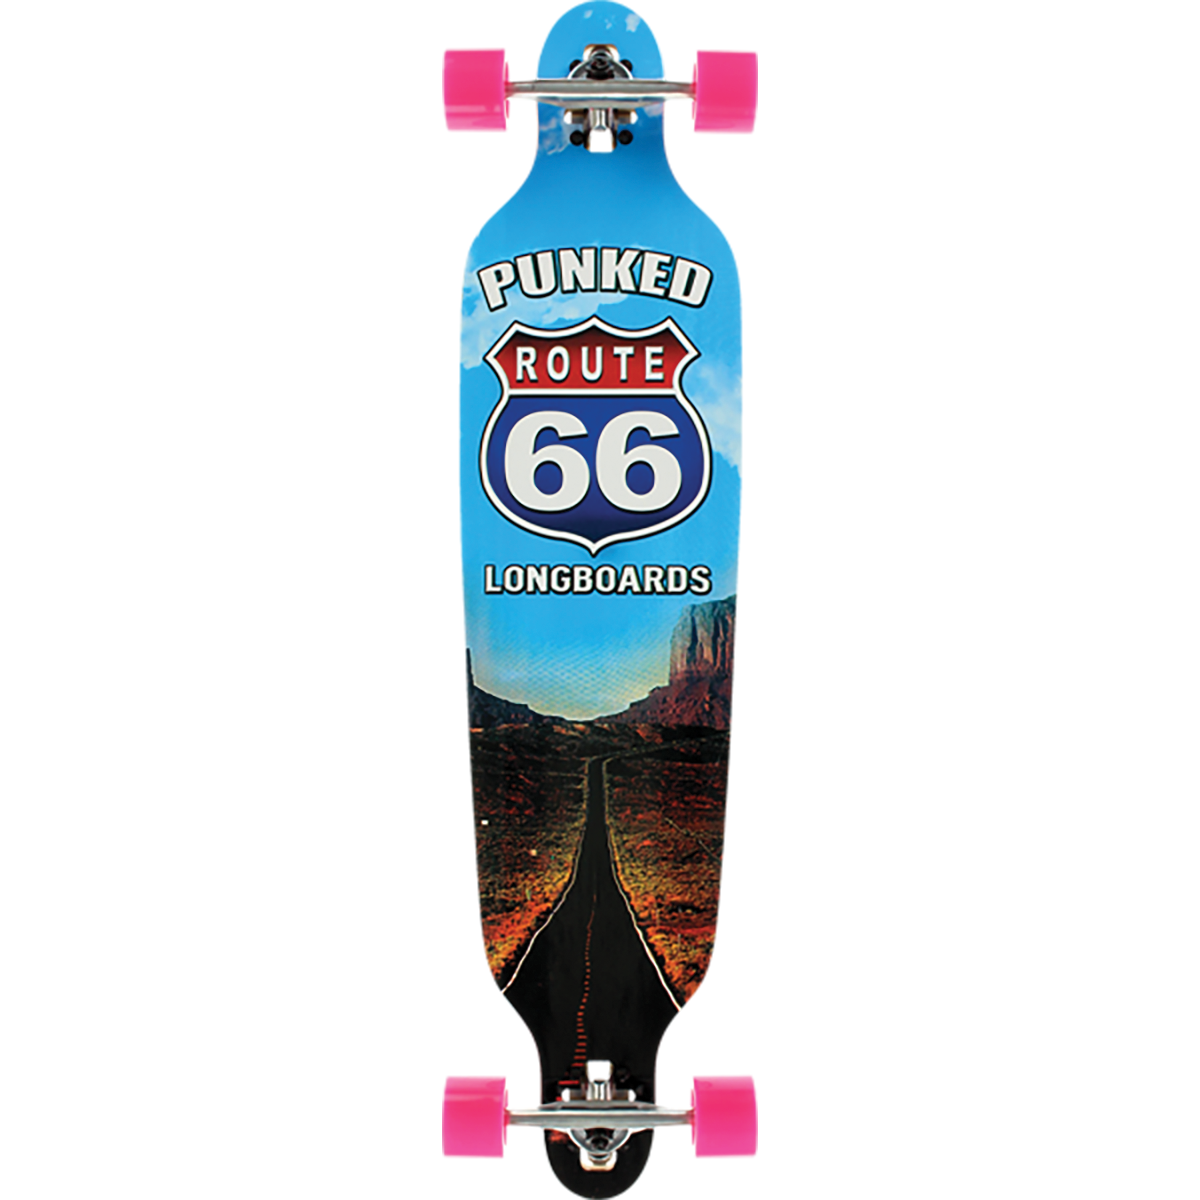 Punked Complete Longboard Skateboard Variation - Ready To Ride out of the Box!